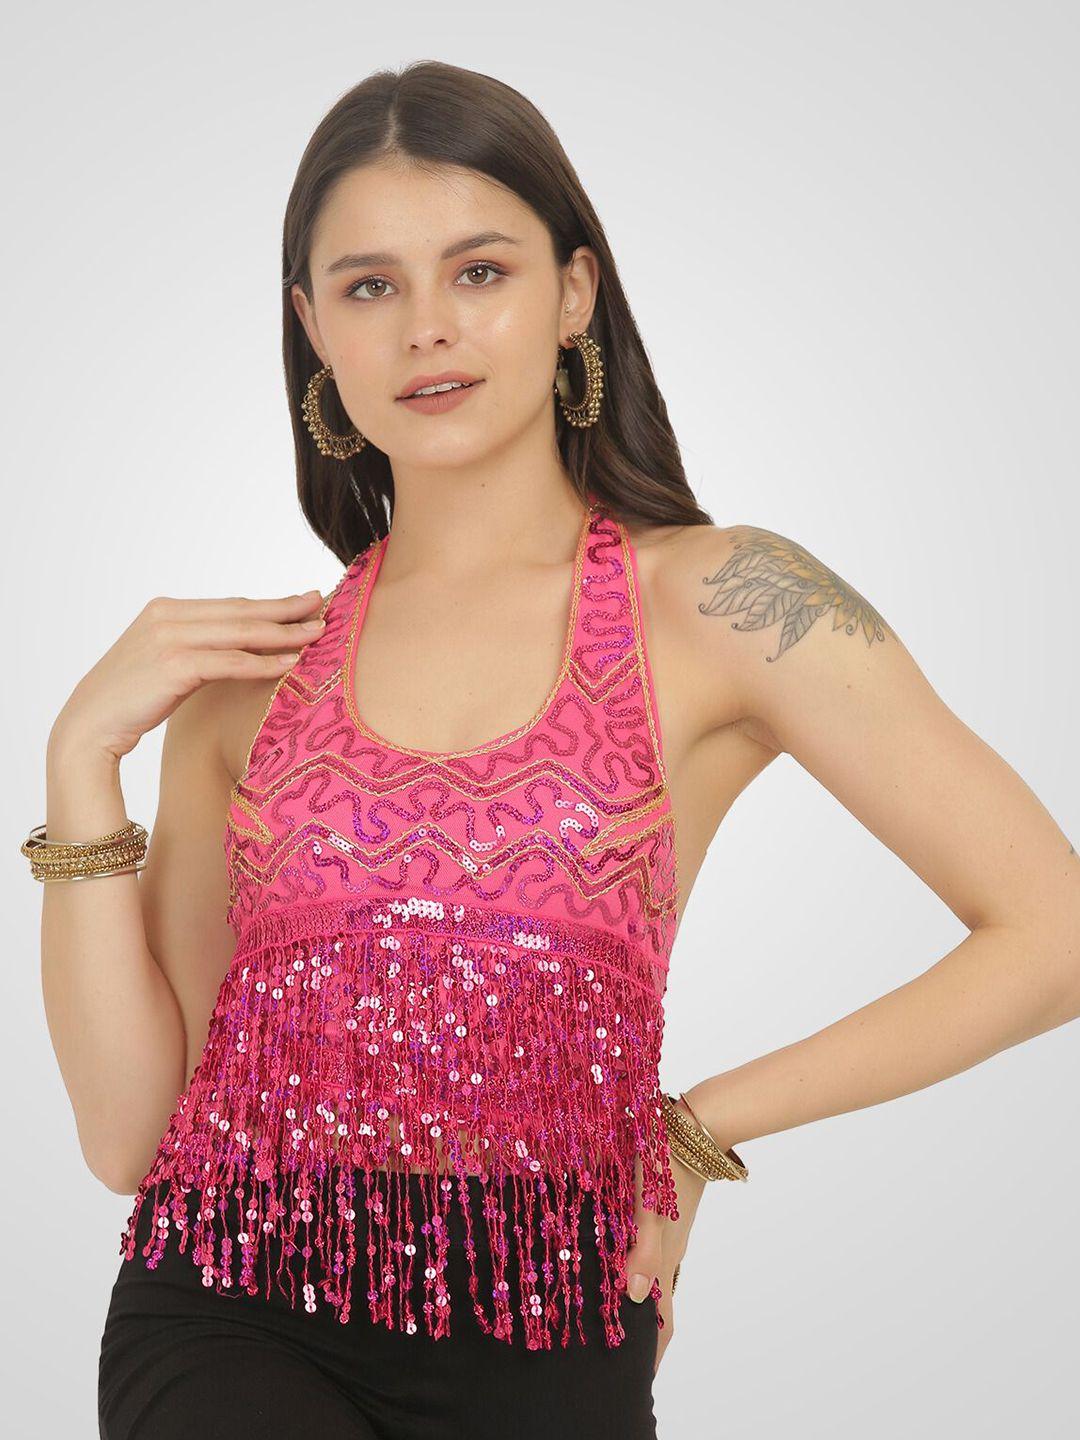 the dance bible pink embellished top